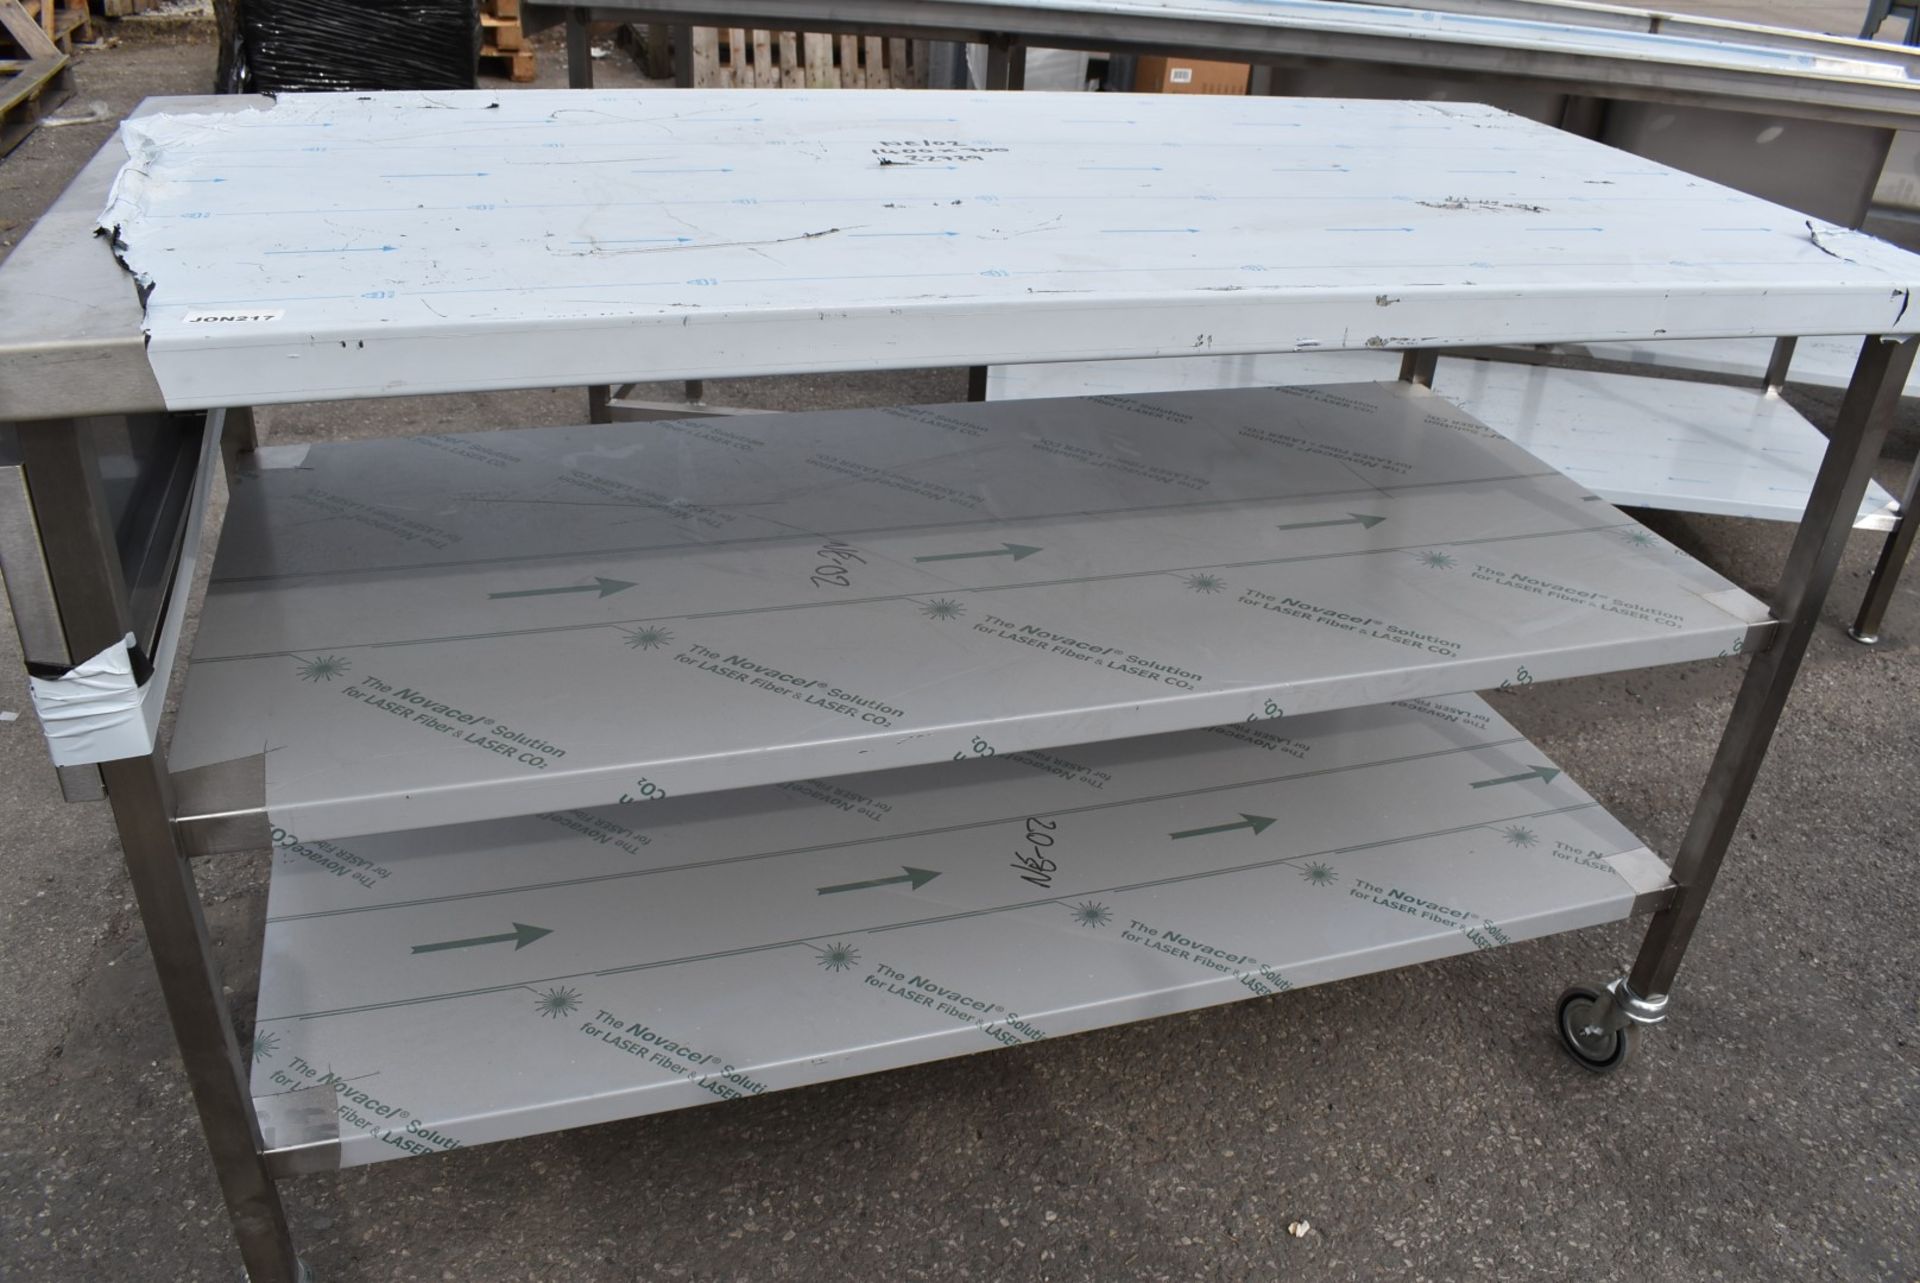 1 x Stainless Steel Prep Table With Castor Wheels and Multiple Undeshelves - Image 6 of 6